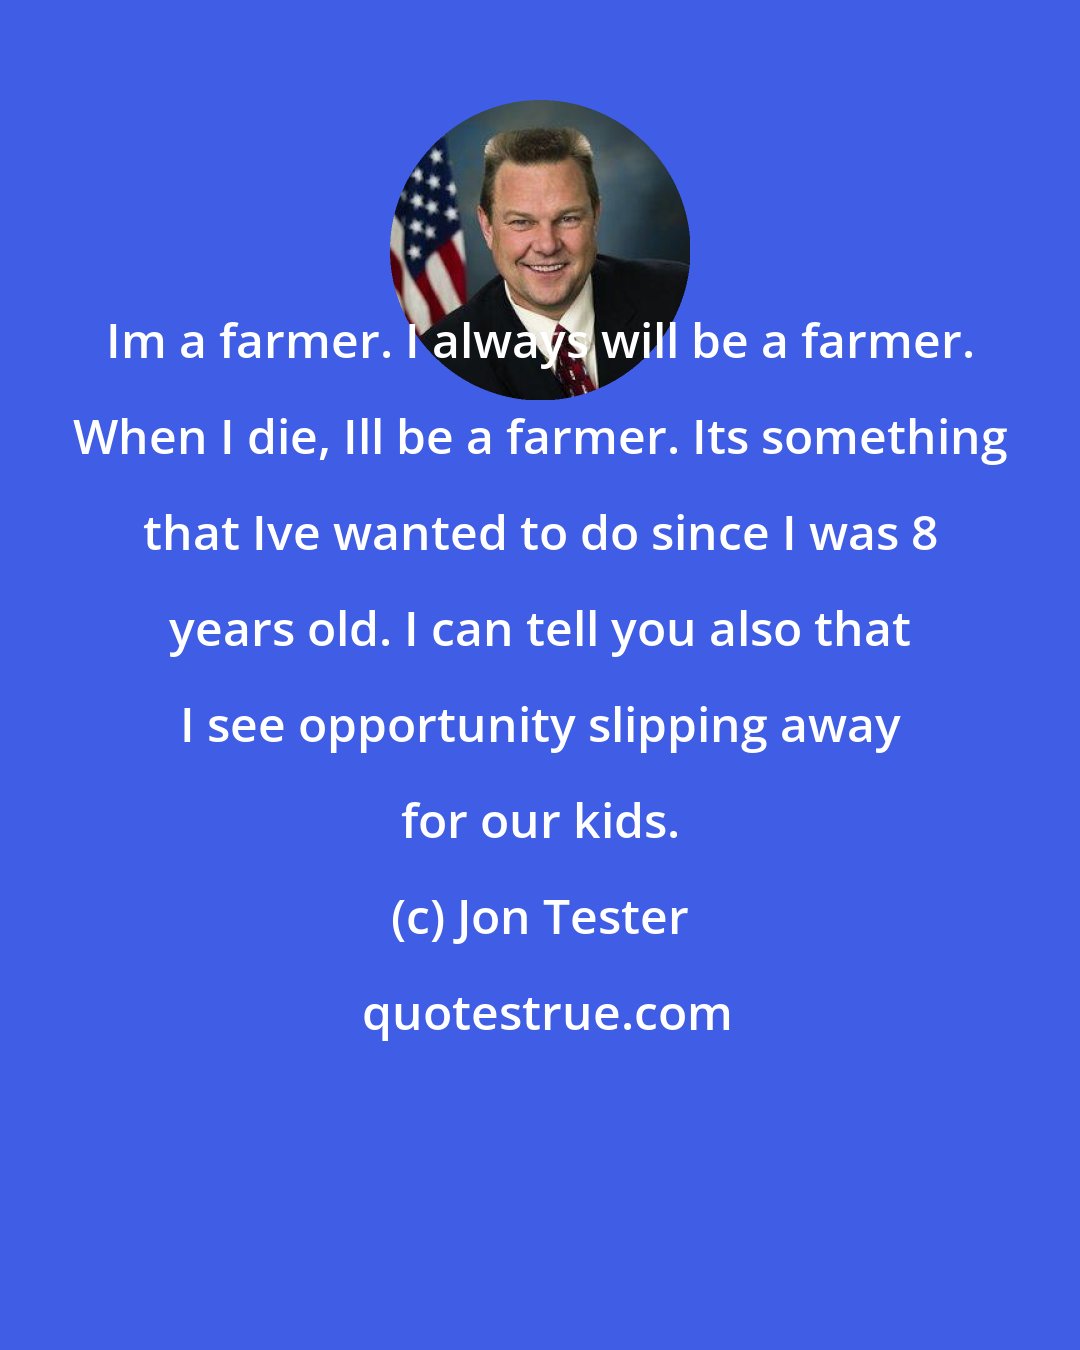 Jon Tester: Im a farmer. I always will be a farmer. When I die, Ill be a farmer. Its something that Ive wanted to do since I was 8 years old. I can tell you also that I see opportunity slipping away for our kids.